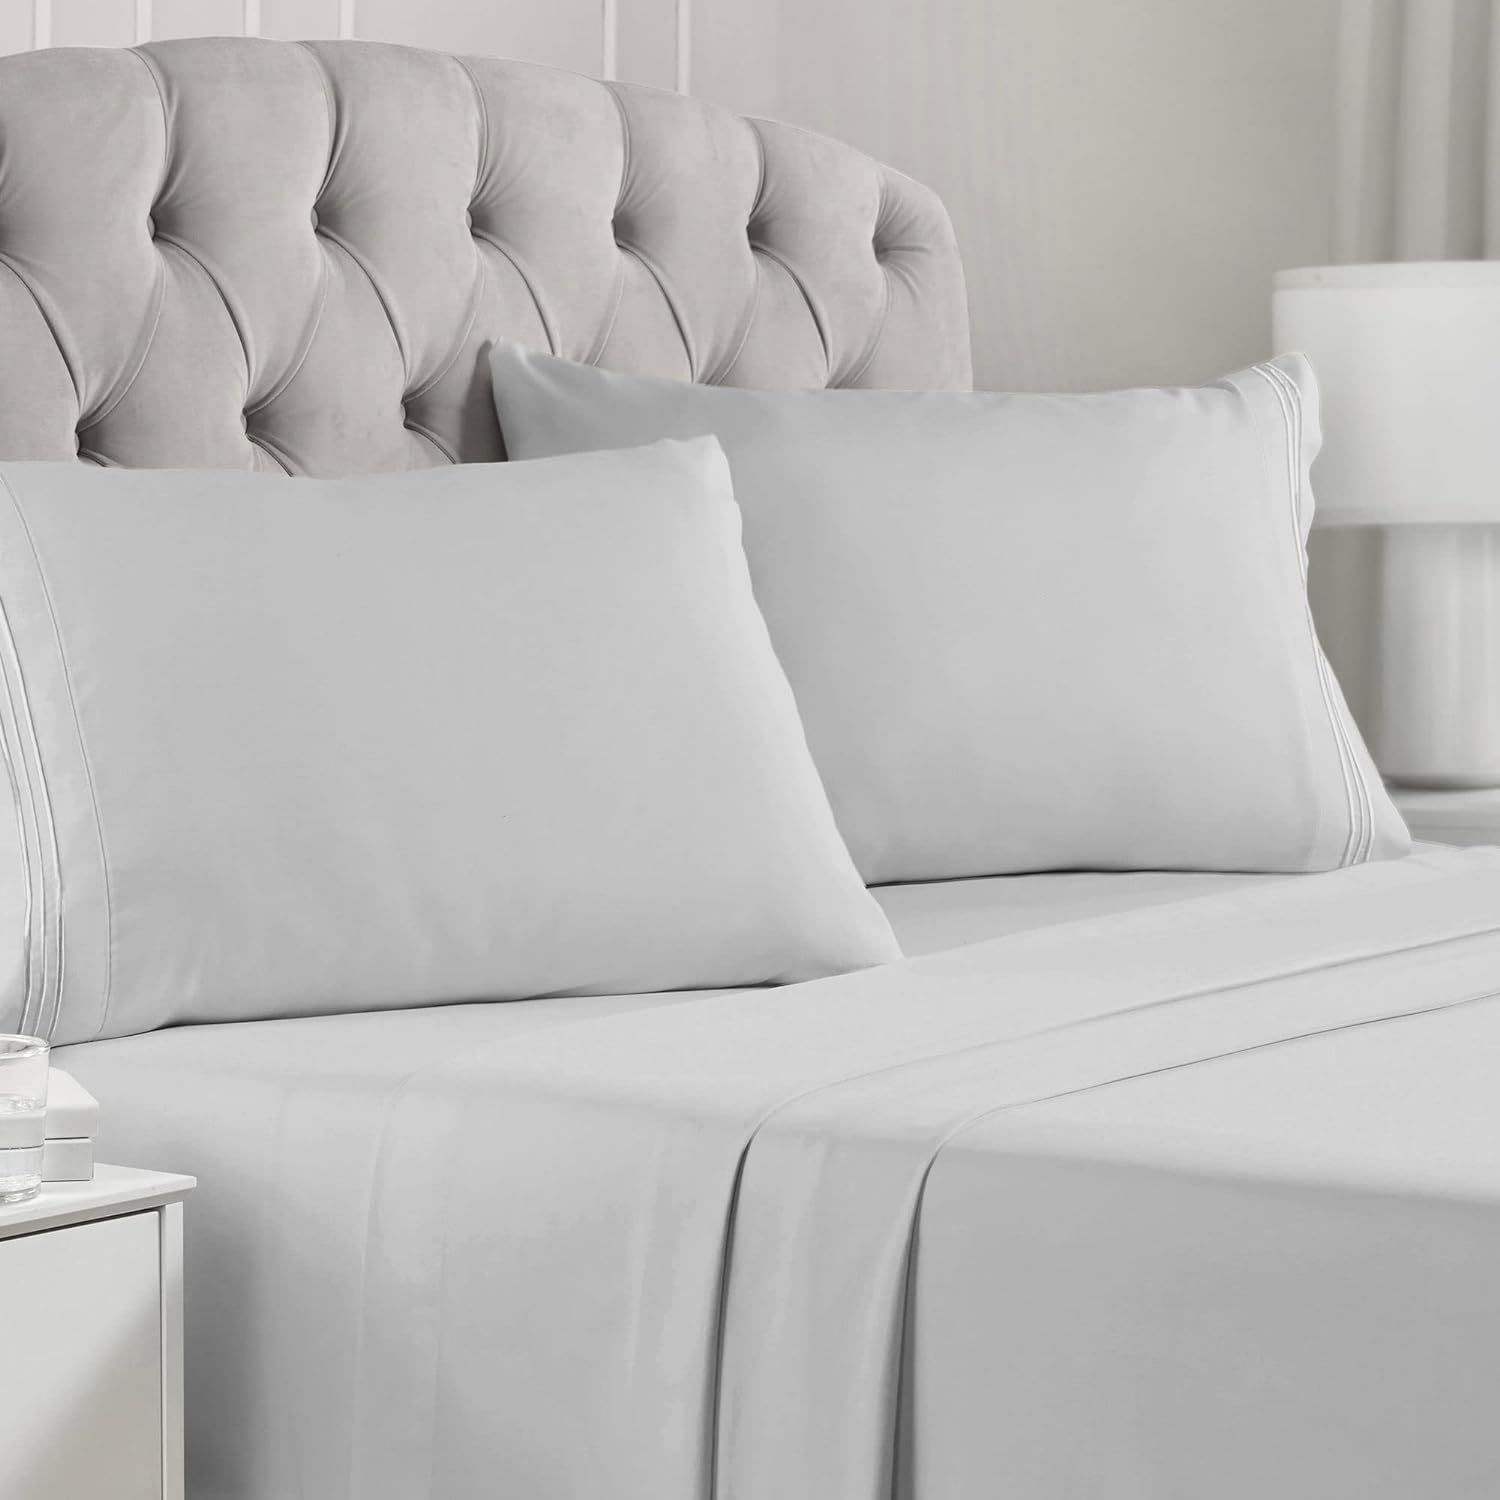 Mellanni Sheets for Queen Size Bed - 4 PC Iconic Collection Bedding Sheets & Pillowcases - Luxury... | Amazon (US)